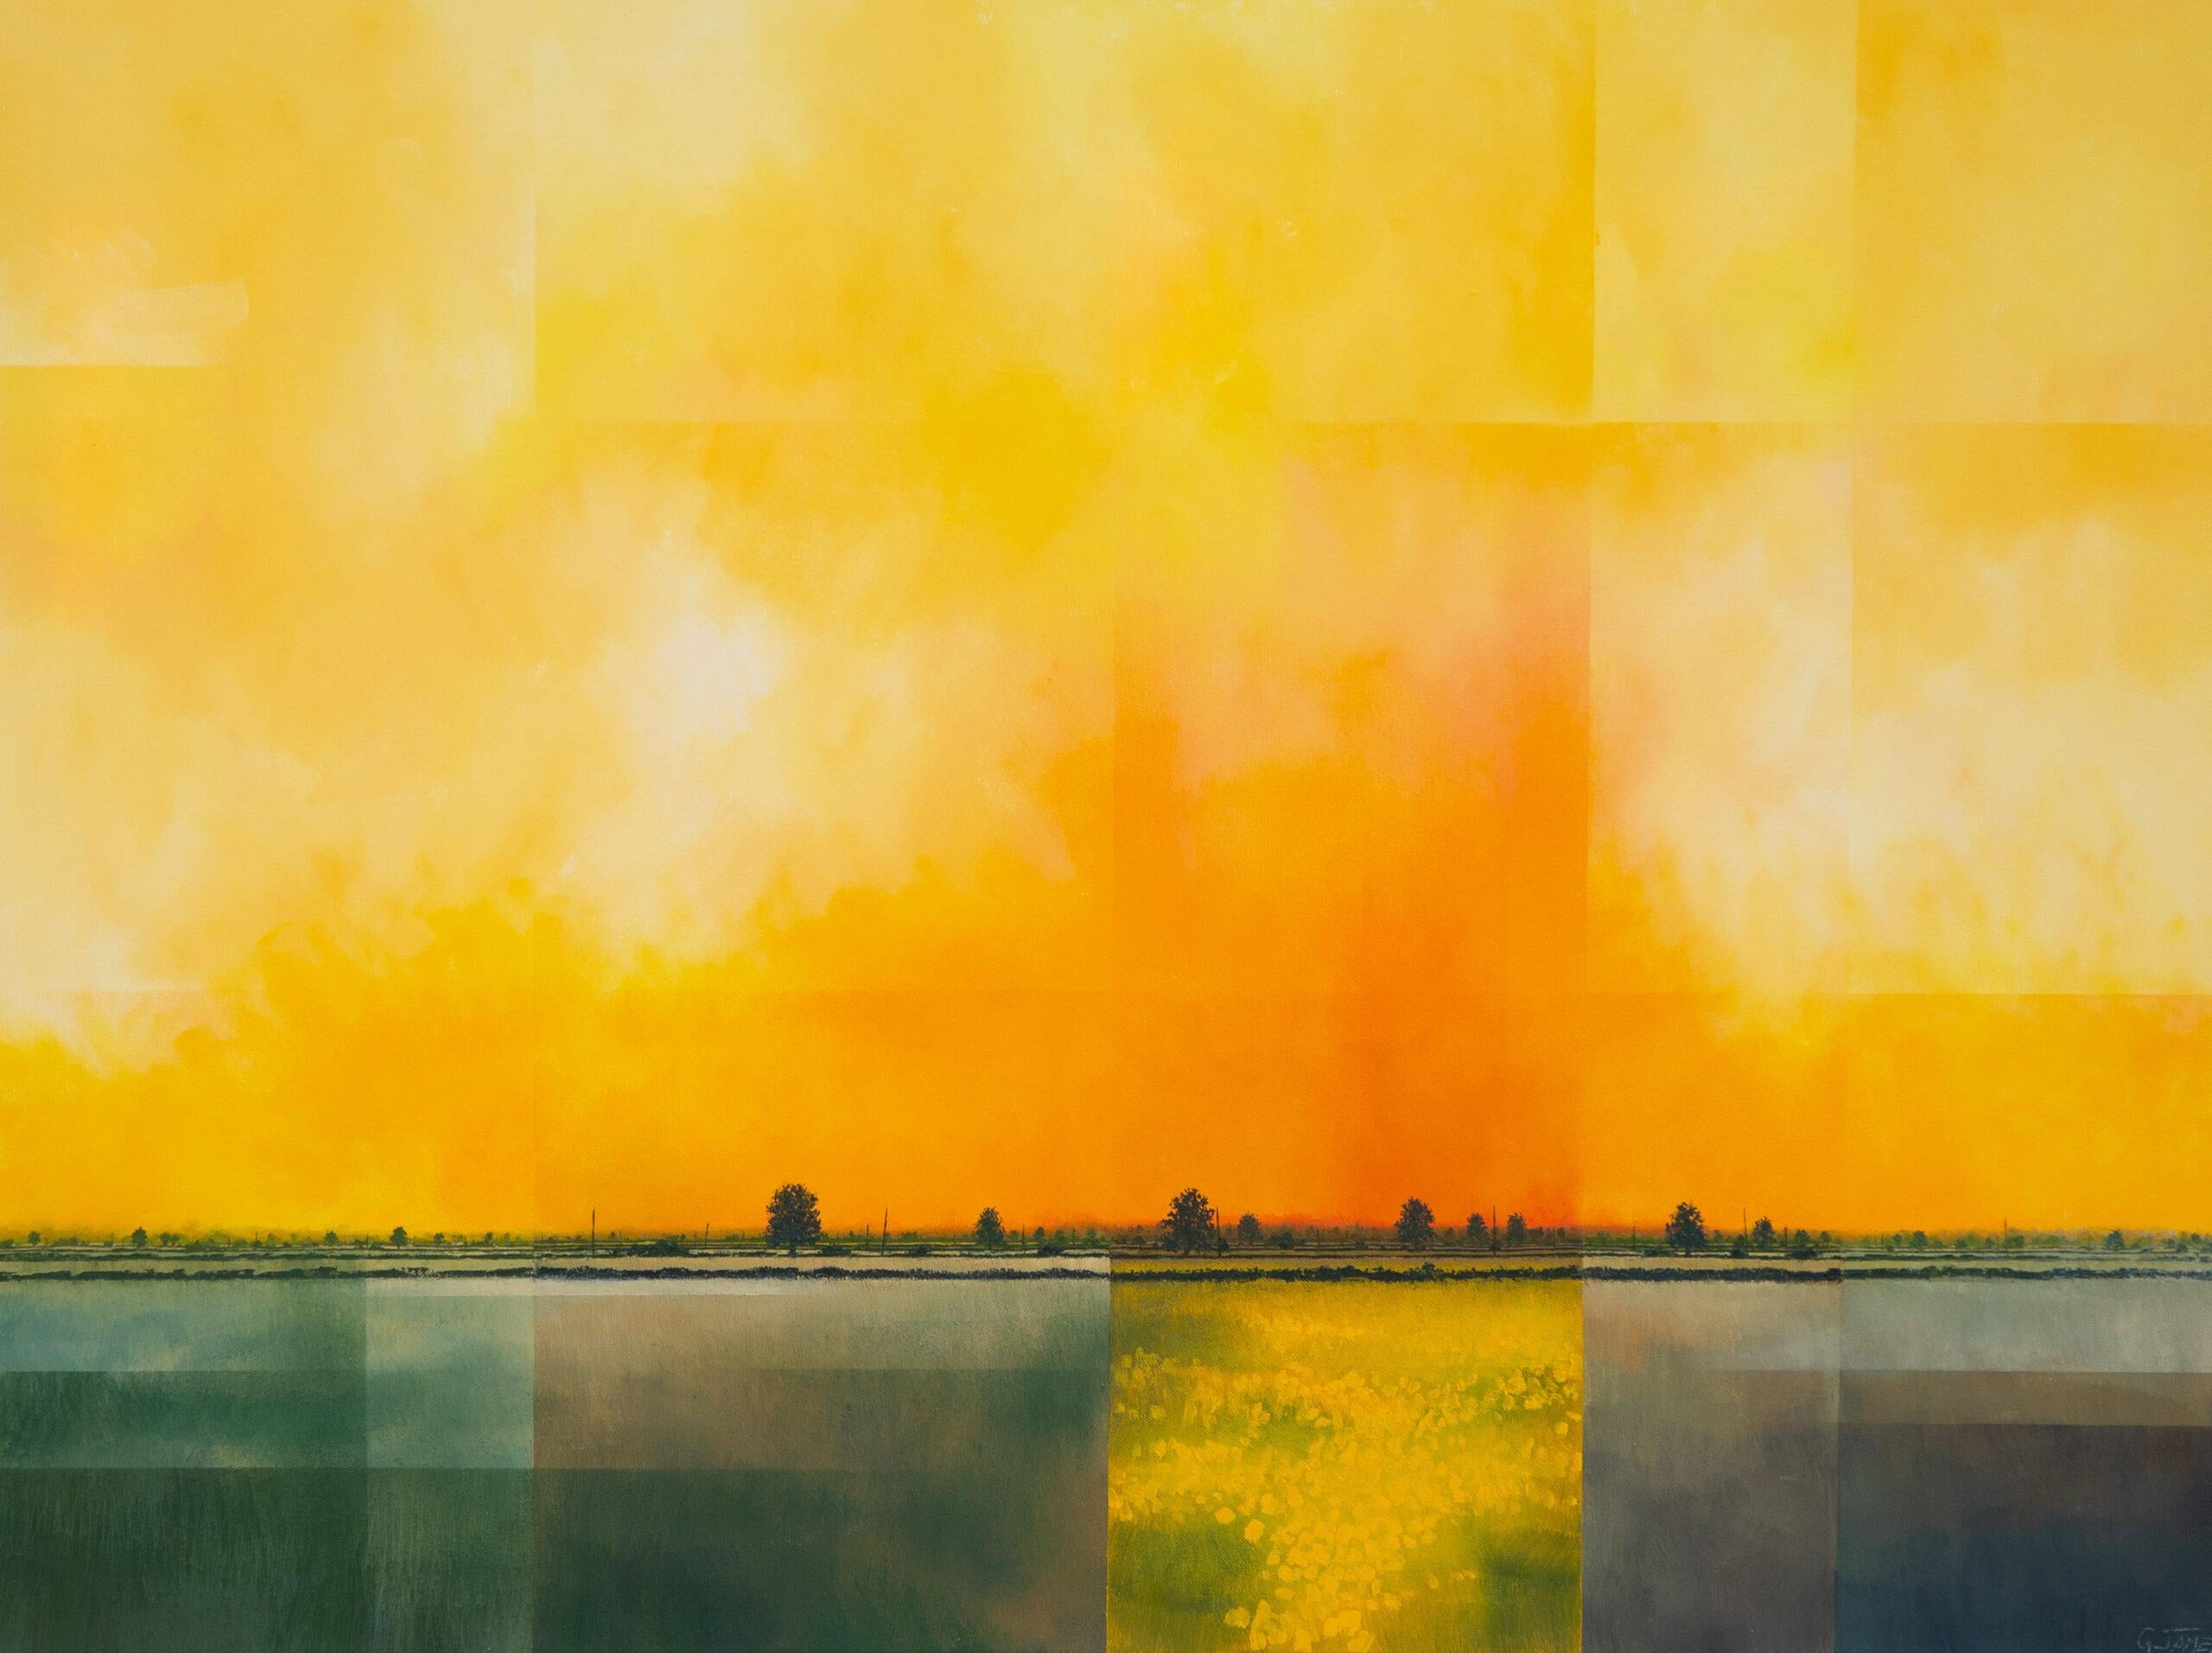 Red Hot Yellows - Contemporary British Landscape: Oil on Canvas - Painting by Glynne James